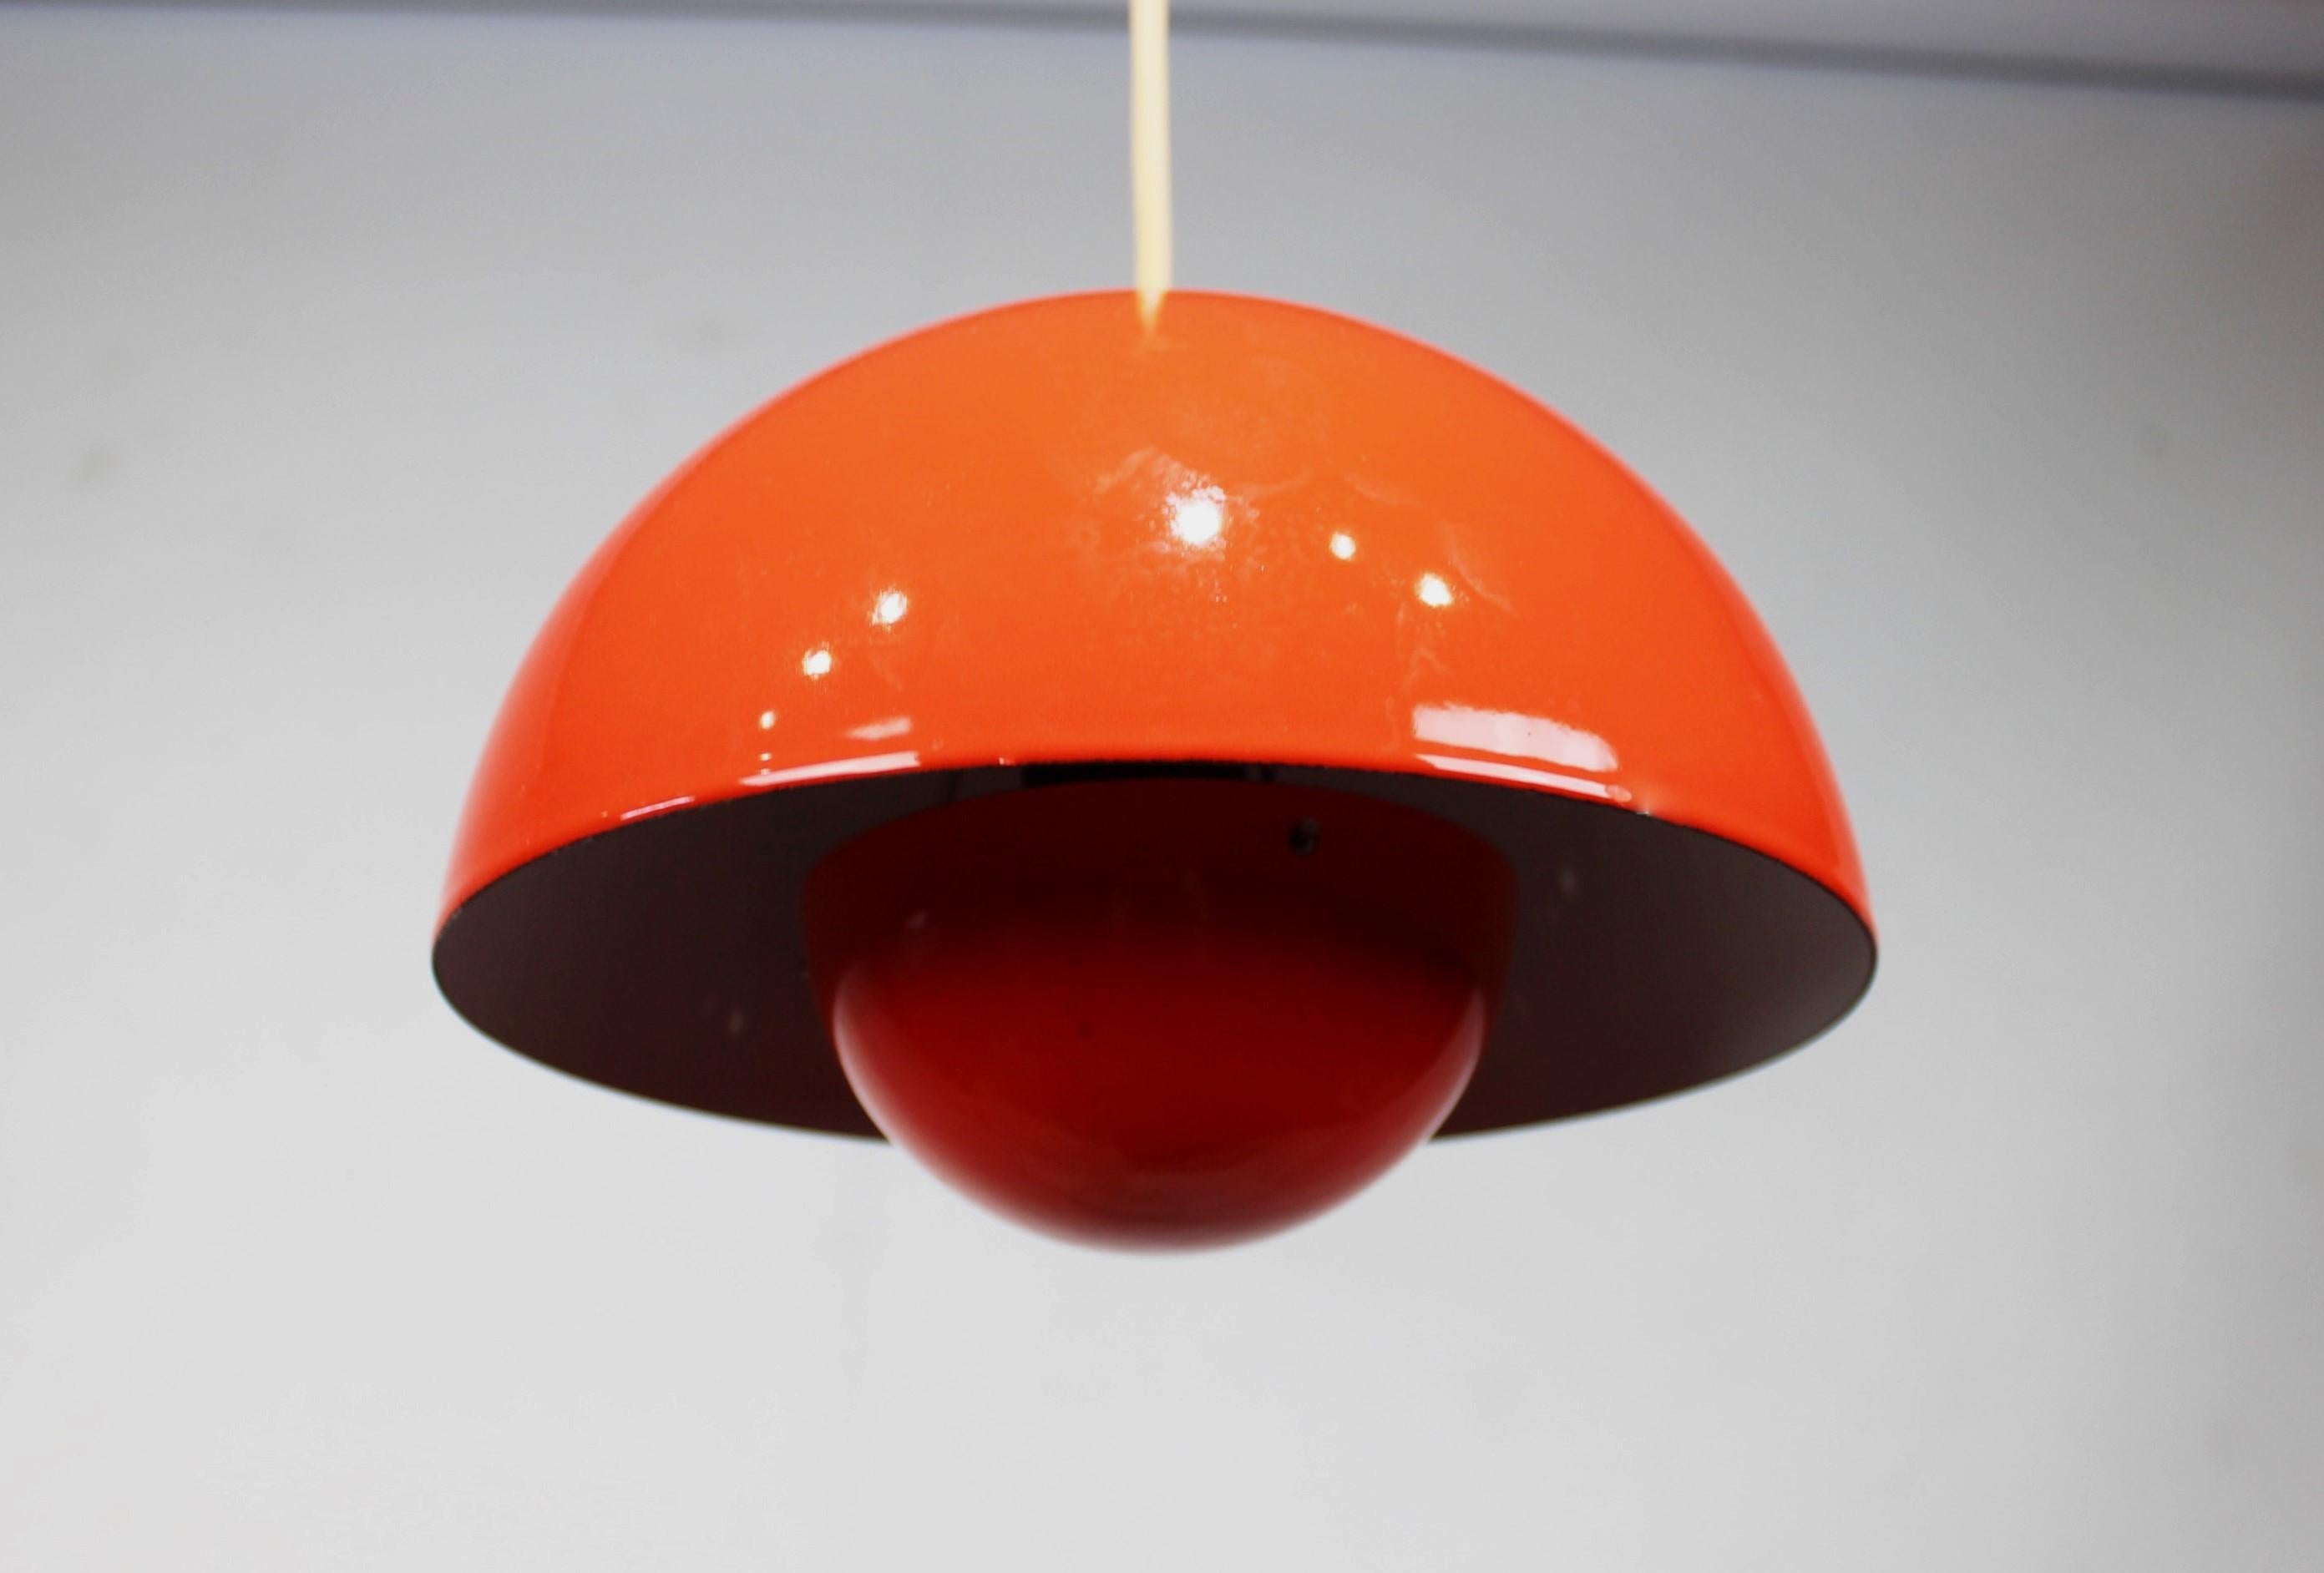 The red Flowerpot pendant, also known as model VP1, is an iconic piece of design created by the Danish architect and designer Verner Panton in 1968. This beautiful light fixture was originally manufactured in the 1970s and has since achieved status